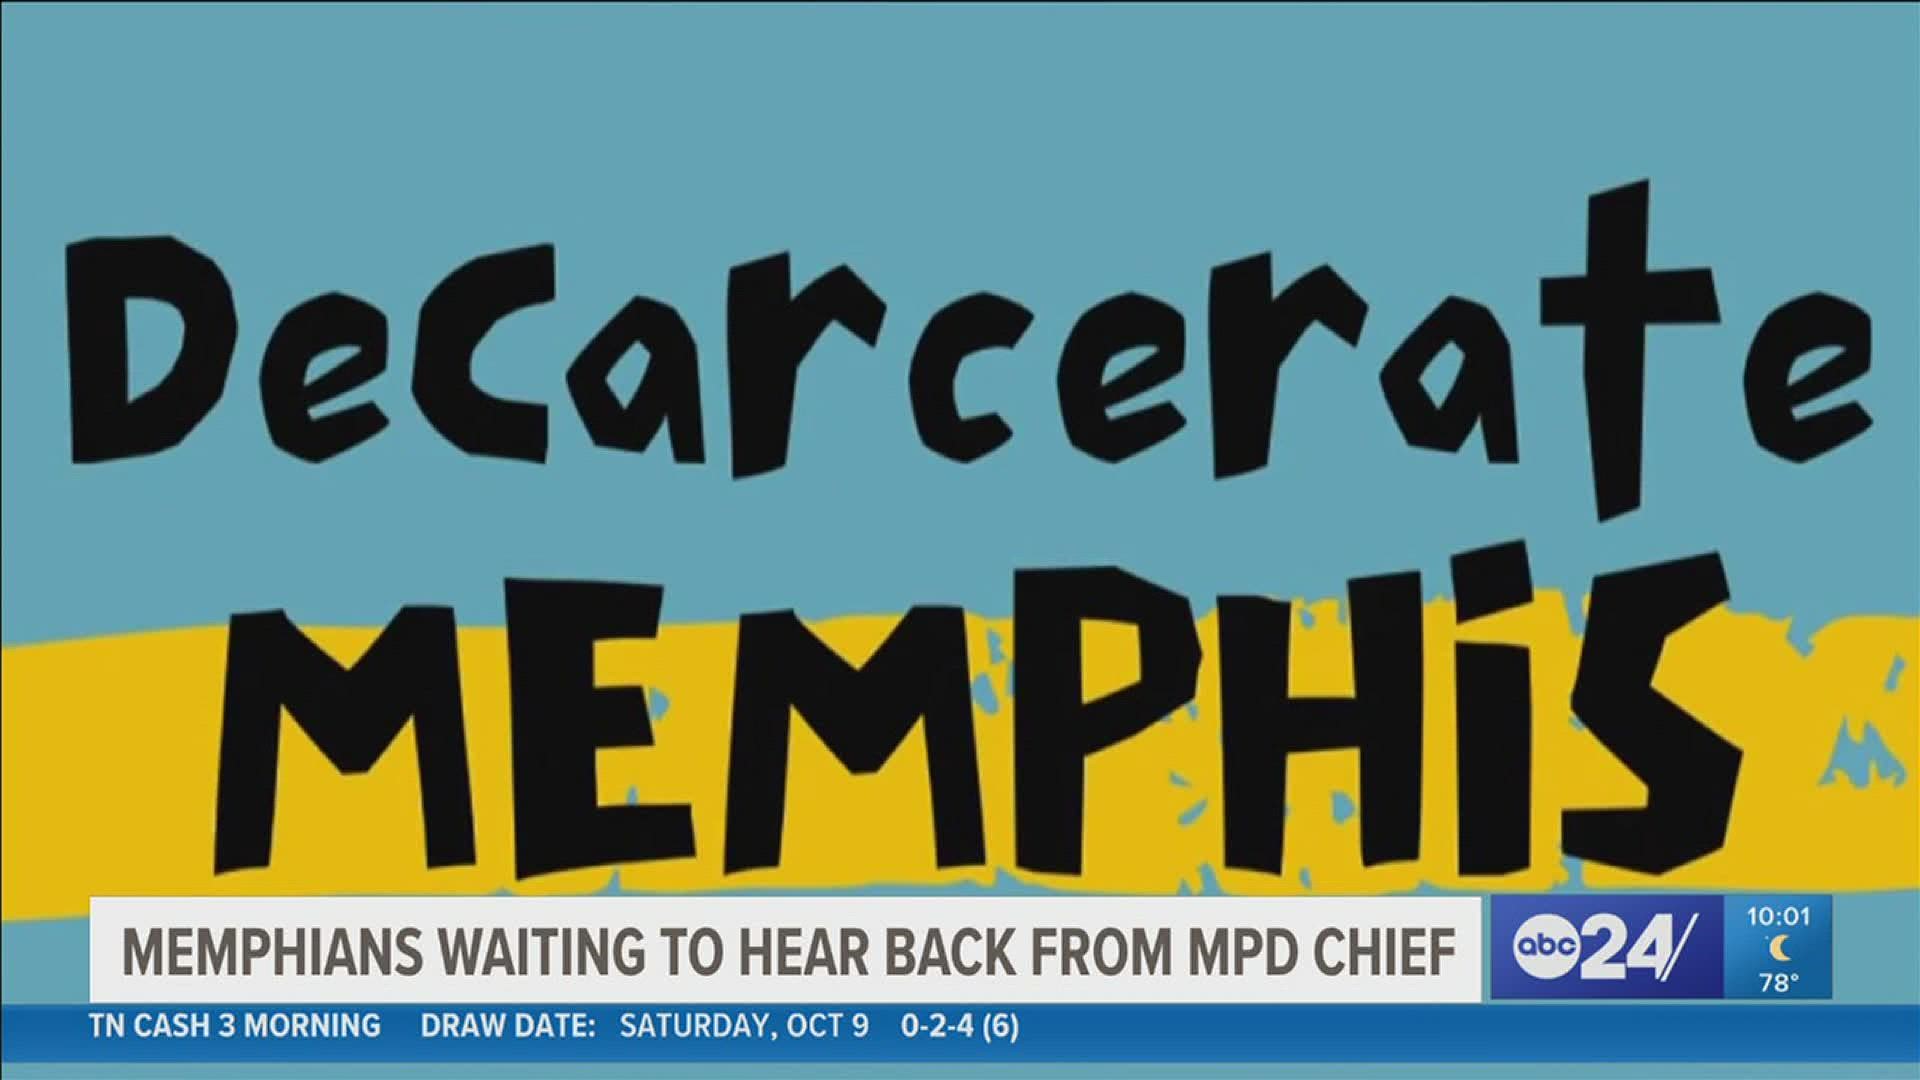 Decarcerate Memphis gave MPD, CJ Davis 100 days to meet 10 demands related to police reform.